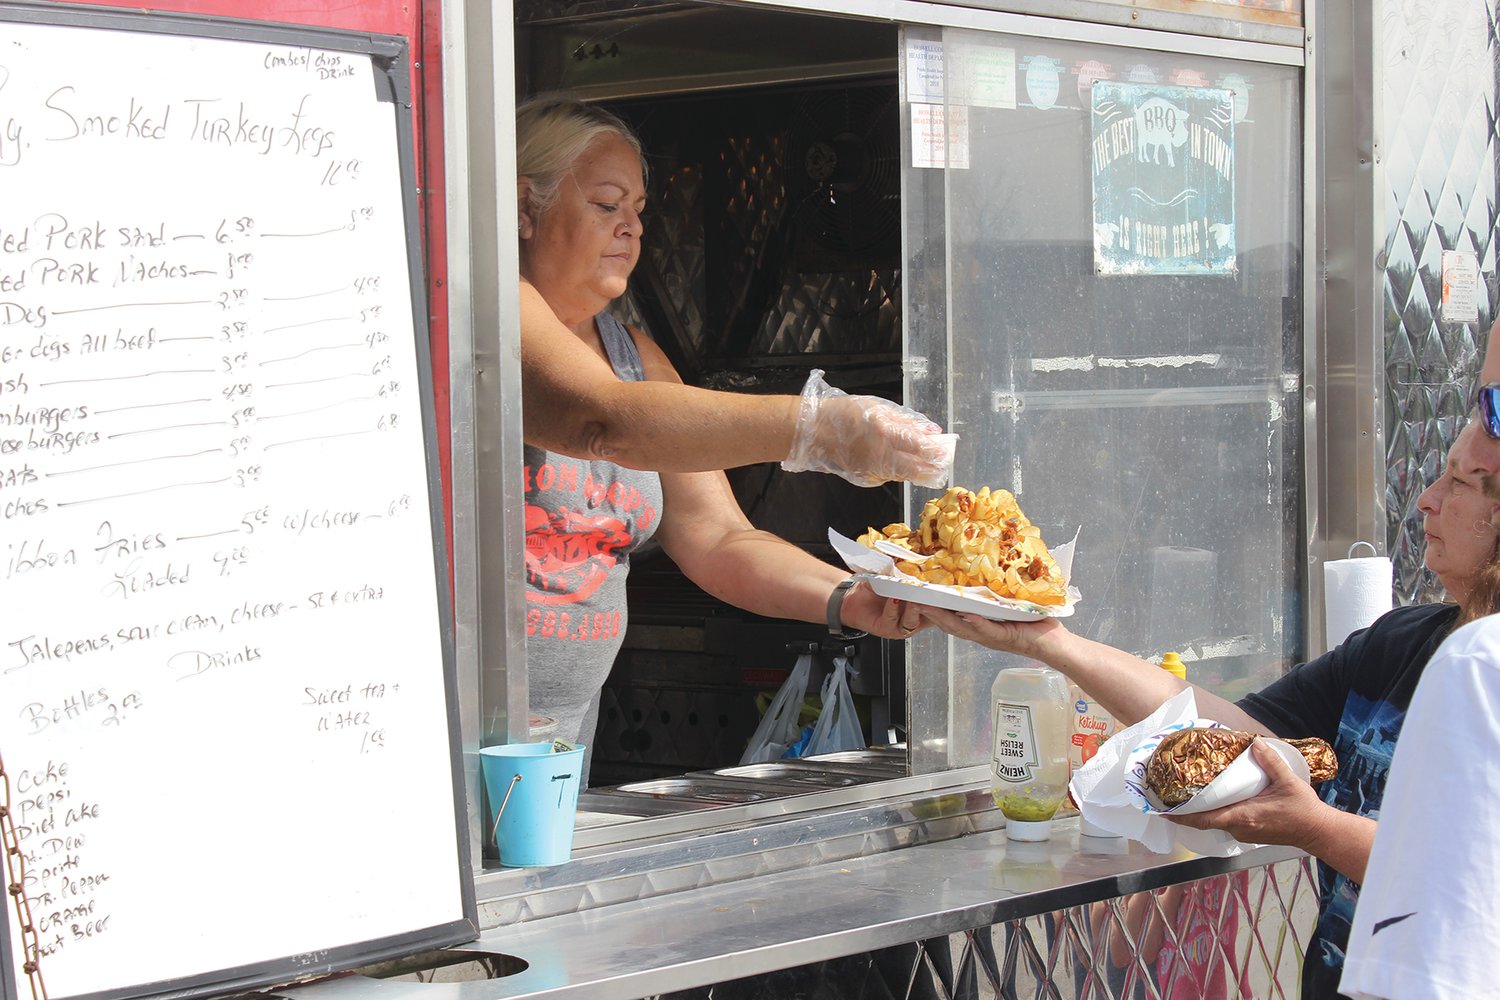 Ribbon fries were one of the popular food vendor items sold at the festival.